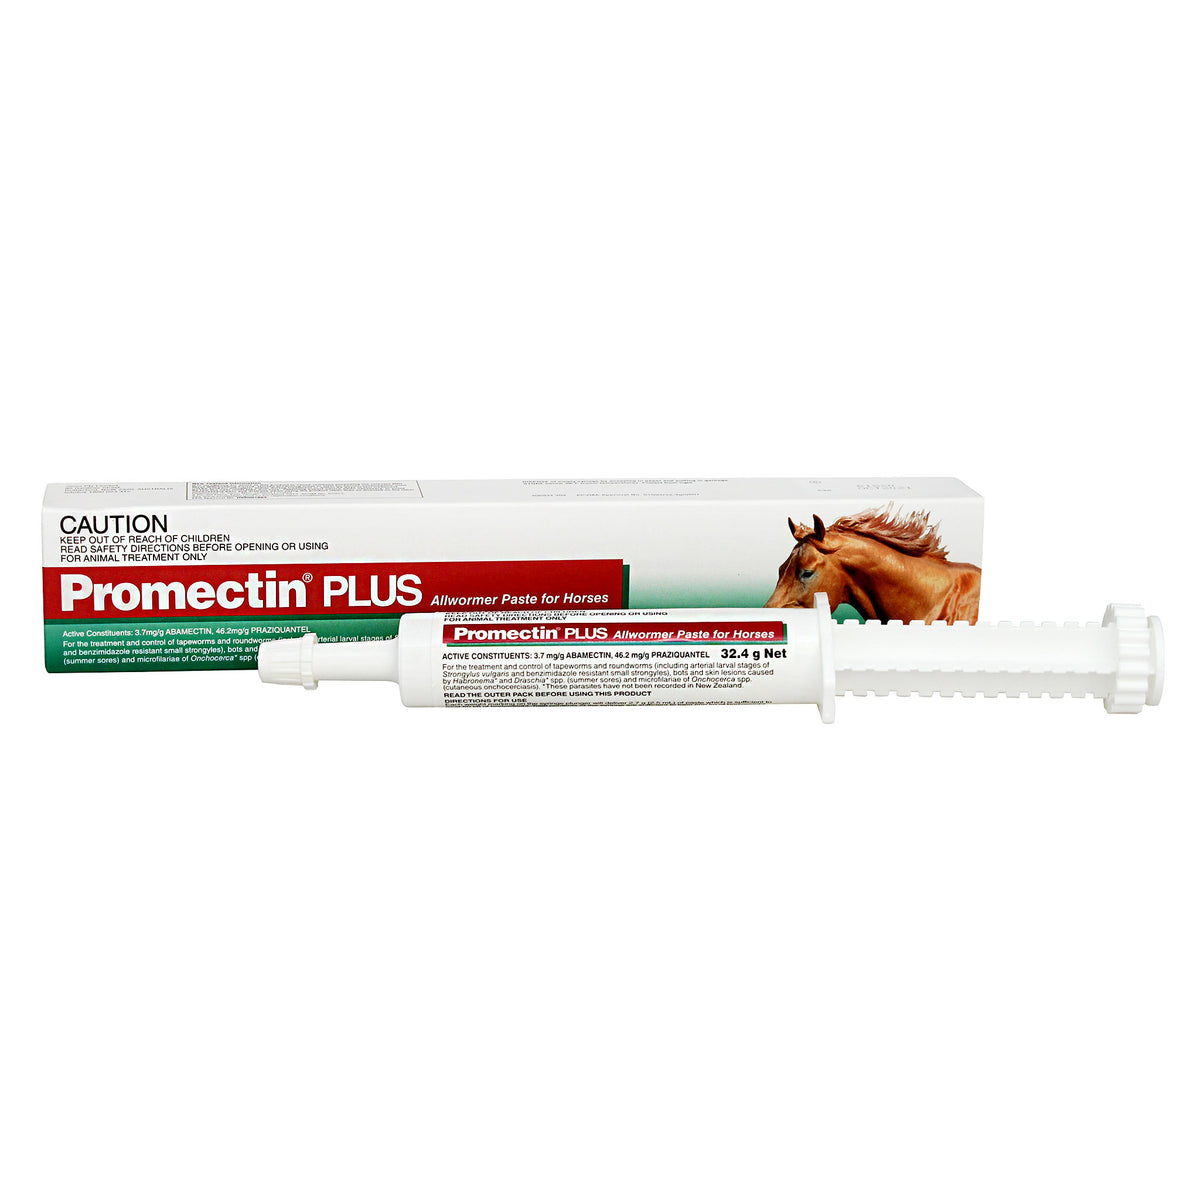 Promectin Plus Worming Paste for Horses 32.4g